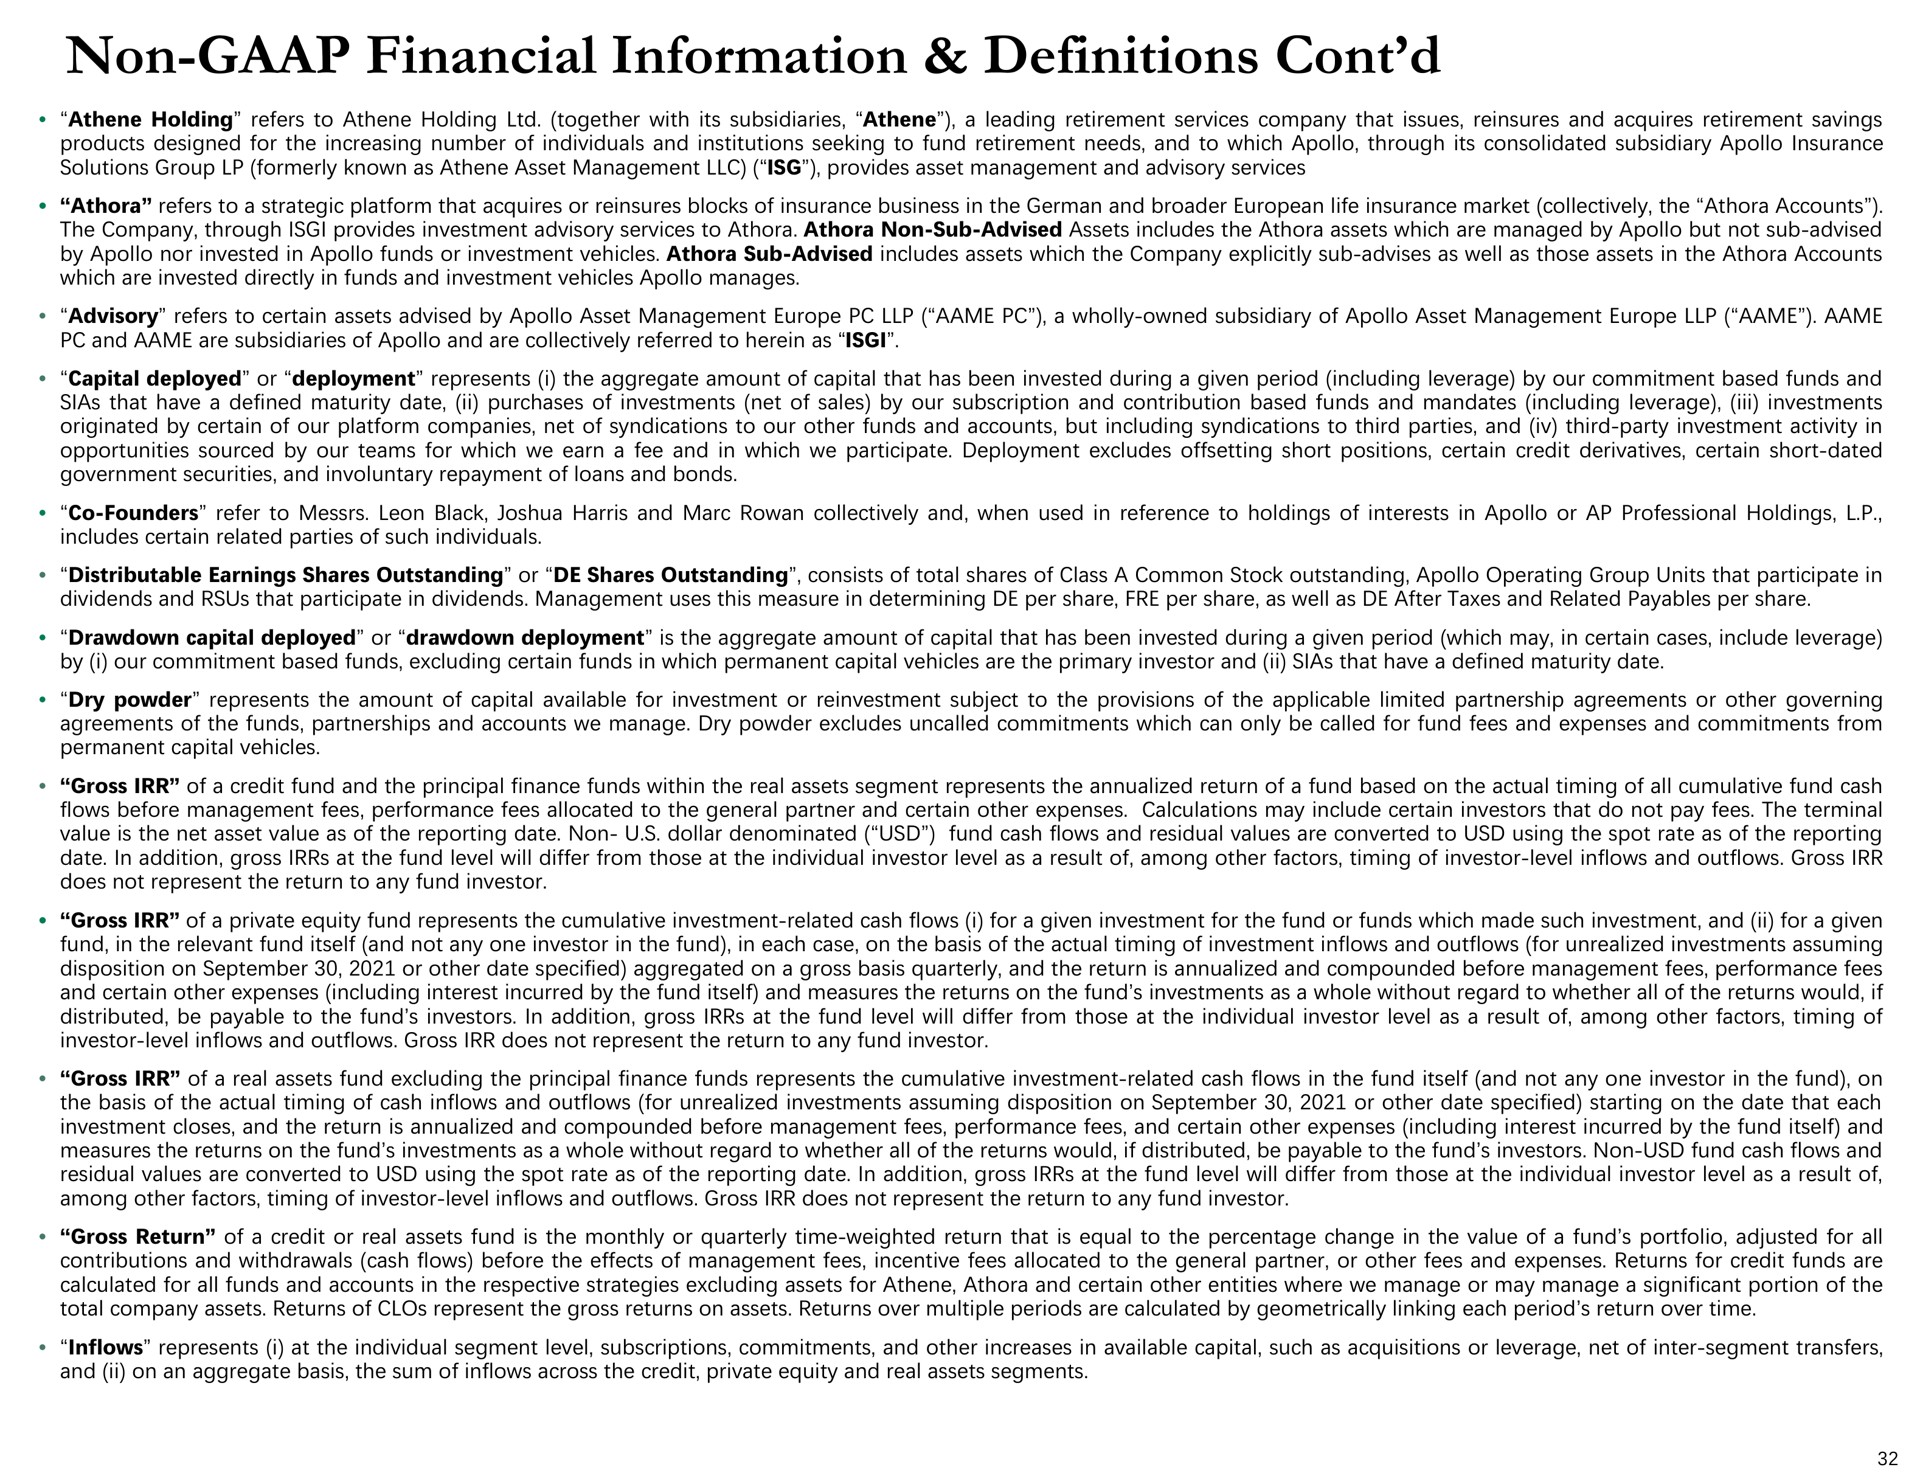 non financial information definitions | Apollo Global Management